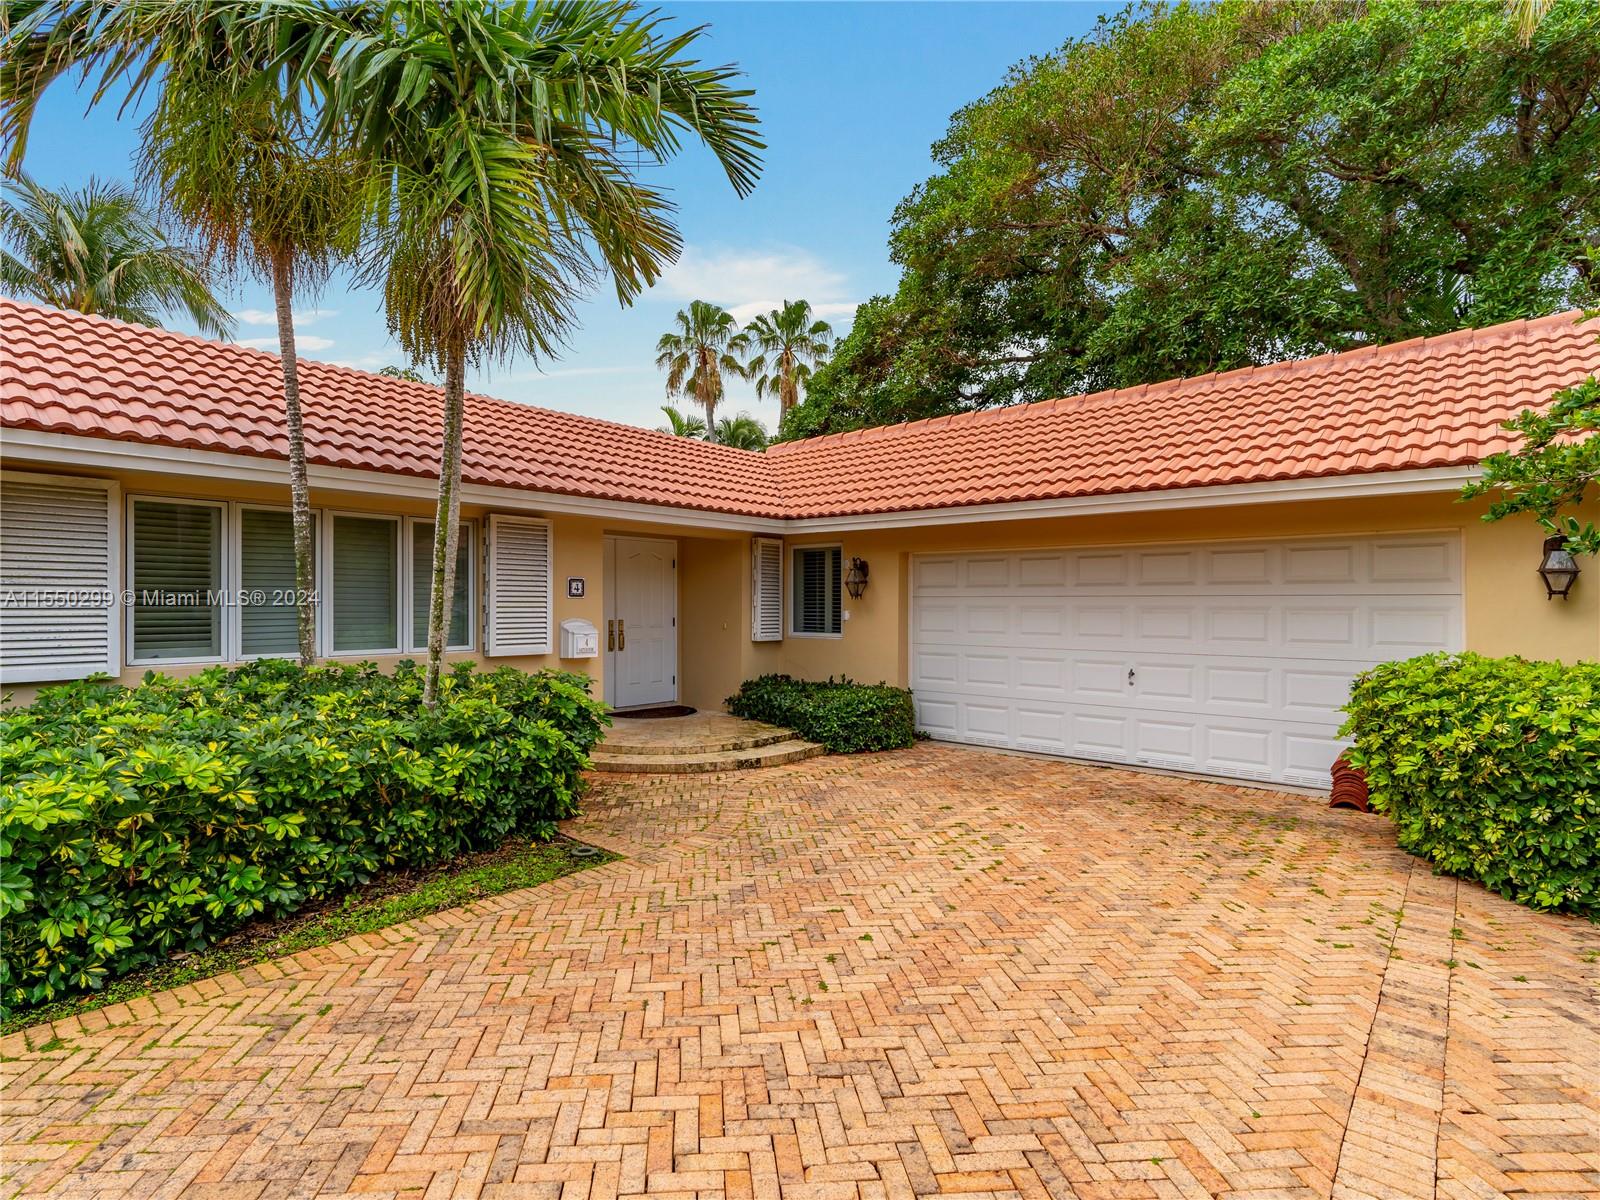 Hurry!! Beautiful 4 bedroom 3 bath single family home in Sea Ranch Lakes/Fort Lauderdale on corner lot. There are 2 large master bedrooms with ensuites and large closets. There is plenty of room for friends and family to gather both inside and outside and is perfect for entertainment. The kitchen has a large island with room for a breakfast table and a built-in desk. This home is situated in the desirable Sea Ranch Lakes gated community, which offers residents access to a private beach club, swimming pool, playground and 24-hour security. 
Windows have hurricane shutters and the backyard has room for a pool. 
The roof is less than a year old.